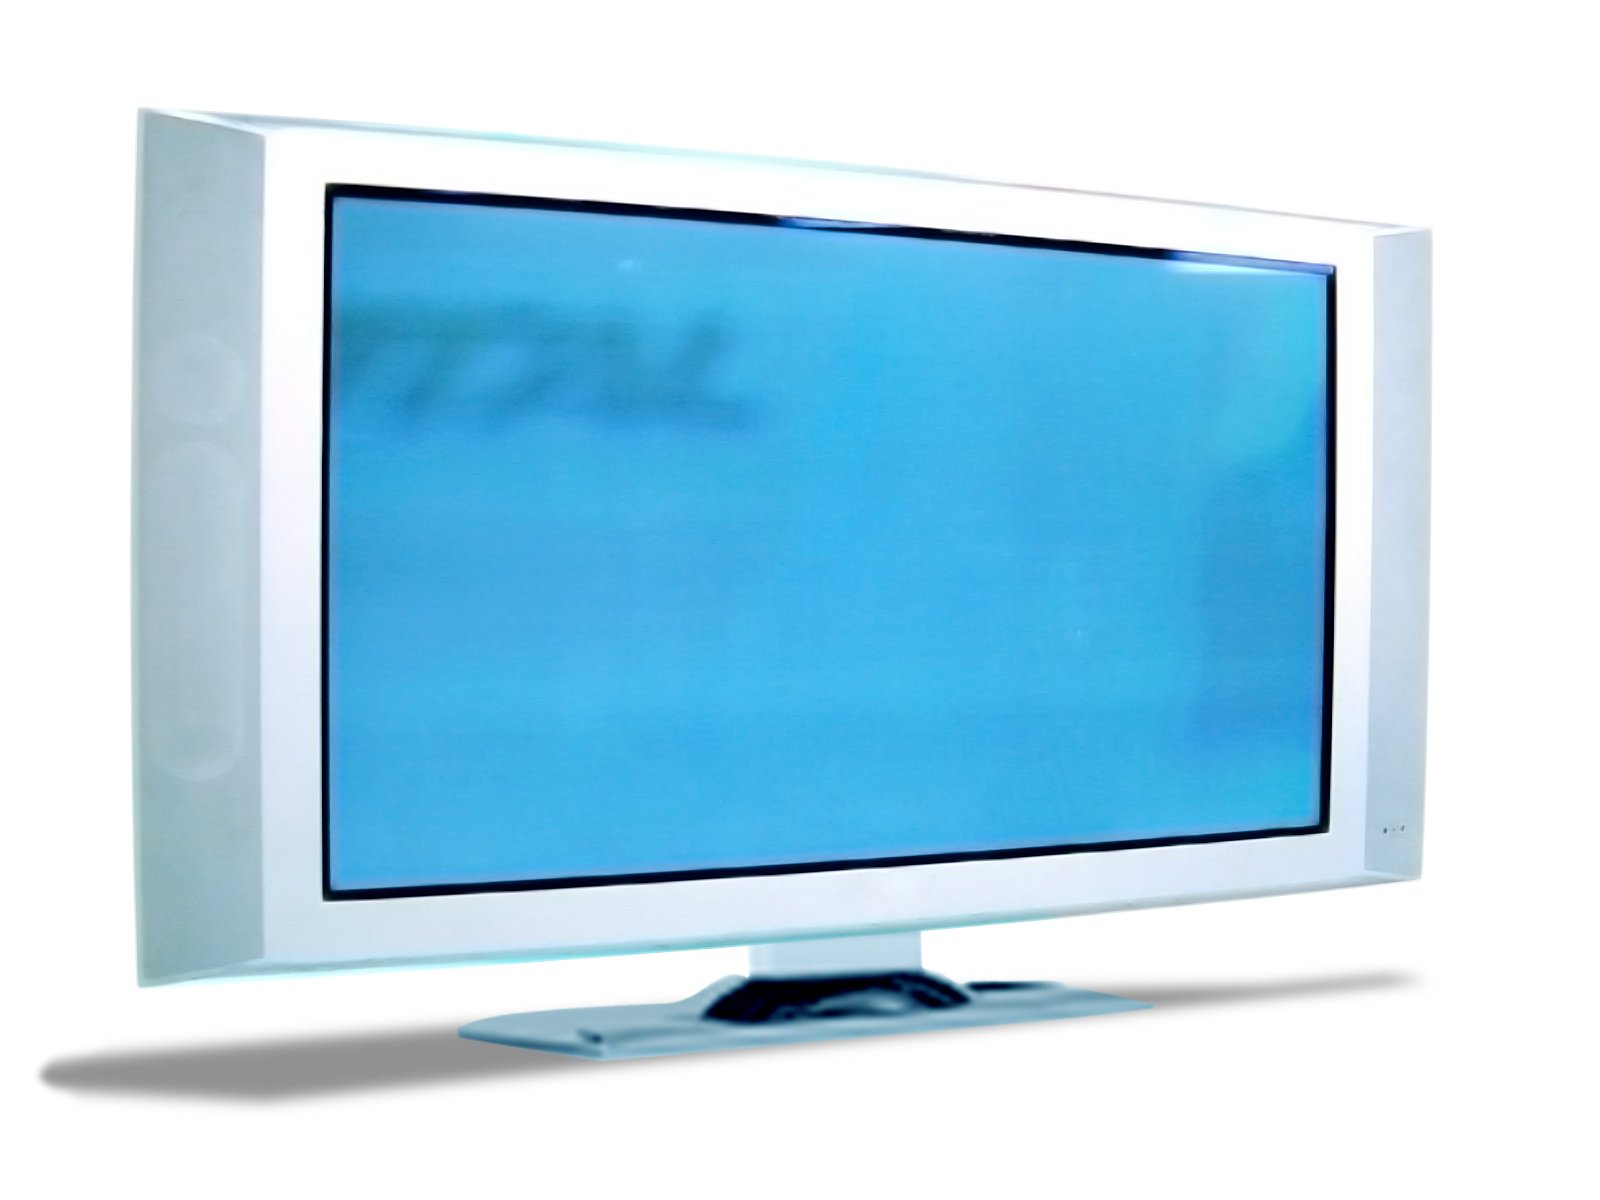 a computer monitor is shown with a white background